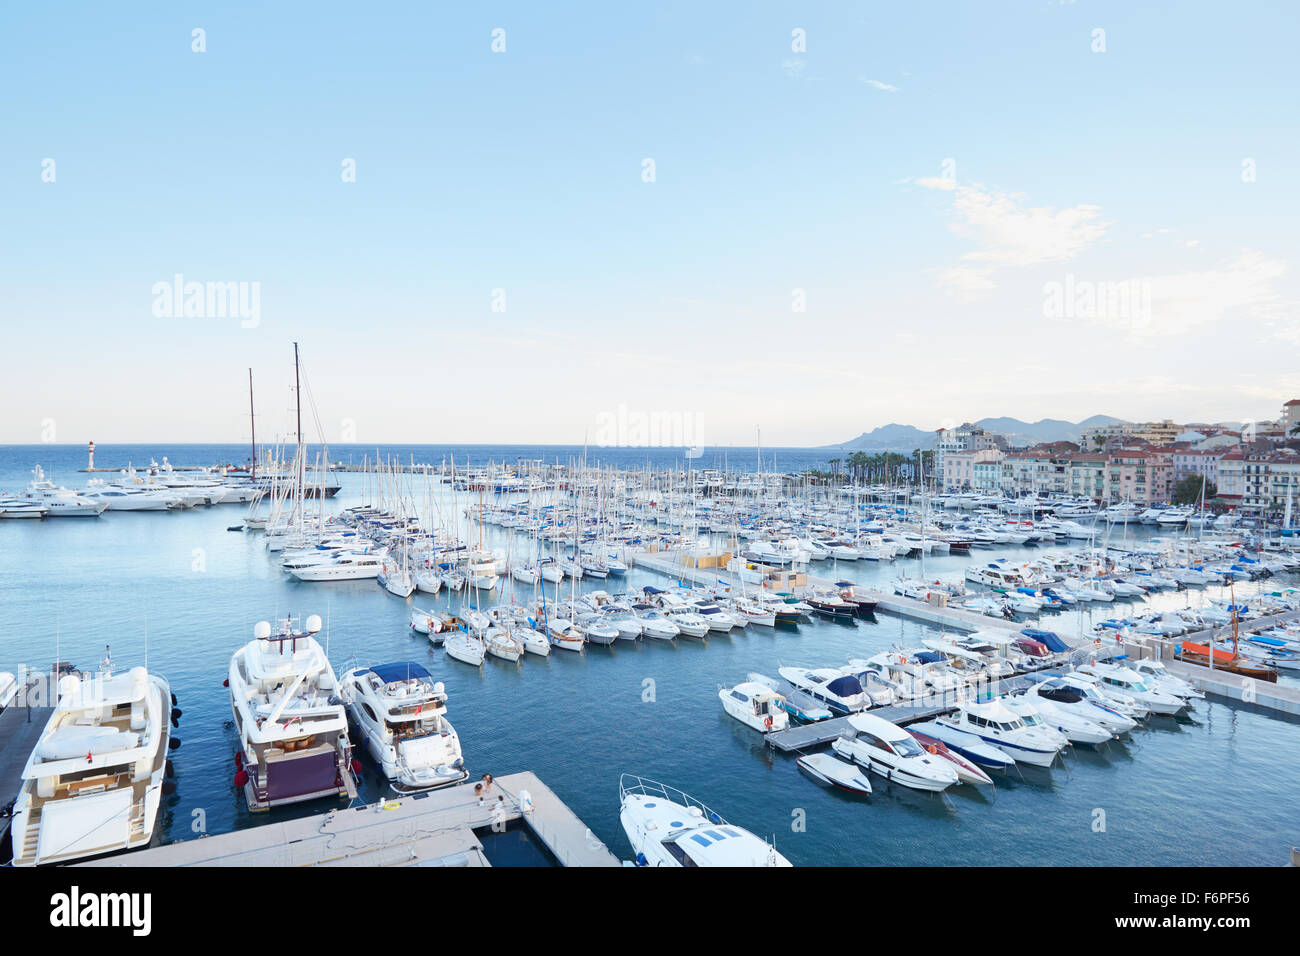 Cannes old harbor boats and yachts, Port Le Vieux in Cannes, Cote d'Azur, France Stock Photo